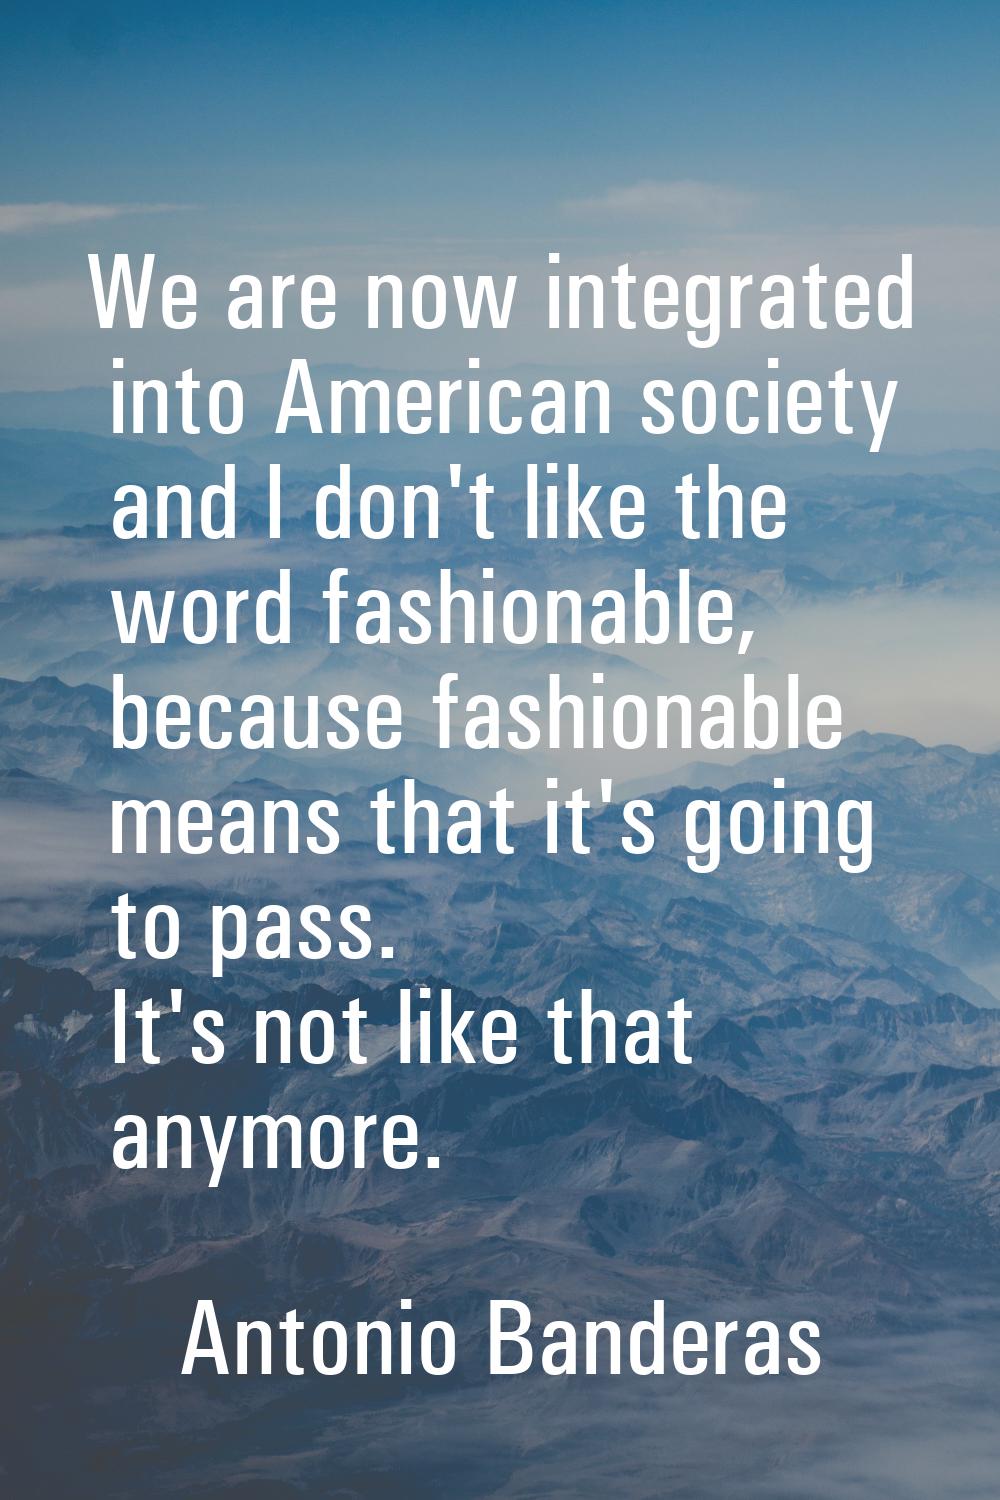 We are now integrated into American society and I don't like the word fashionable, because fashiona